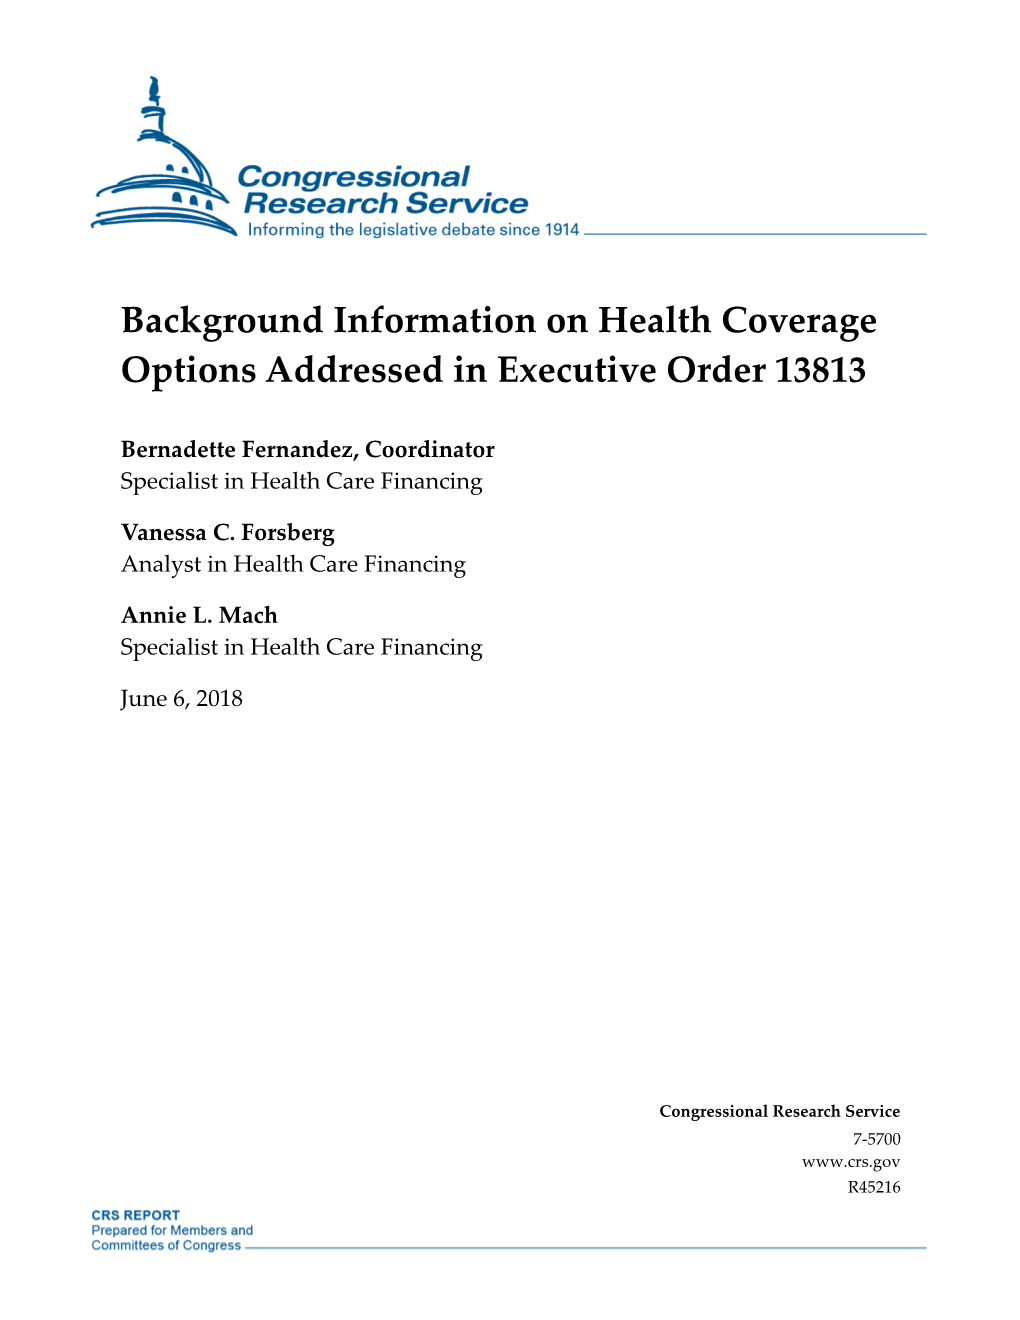 Background Information on Health Coverage Options Addressed in Executive Order 13813